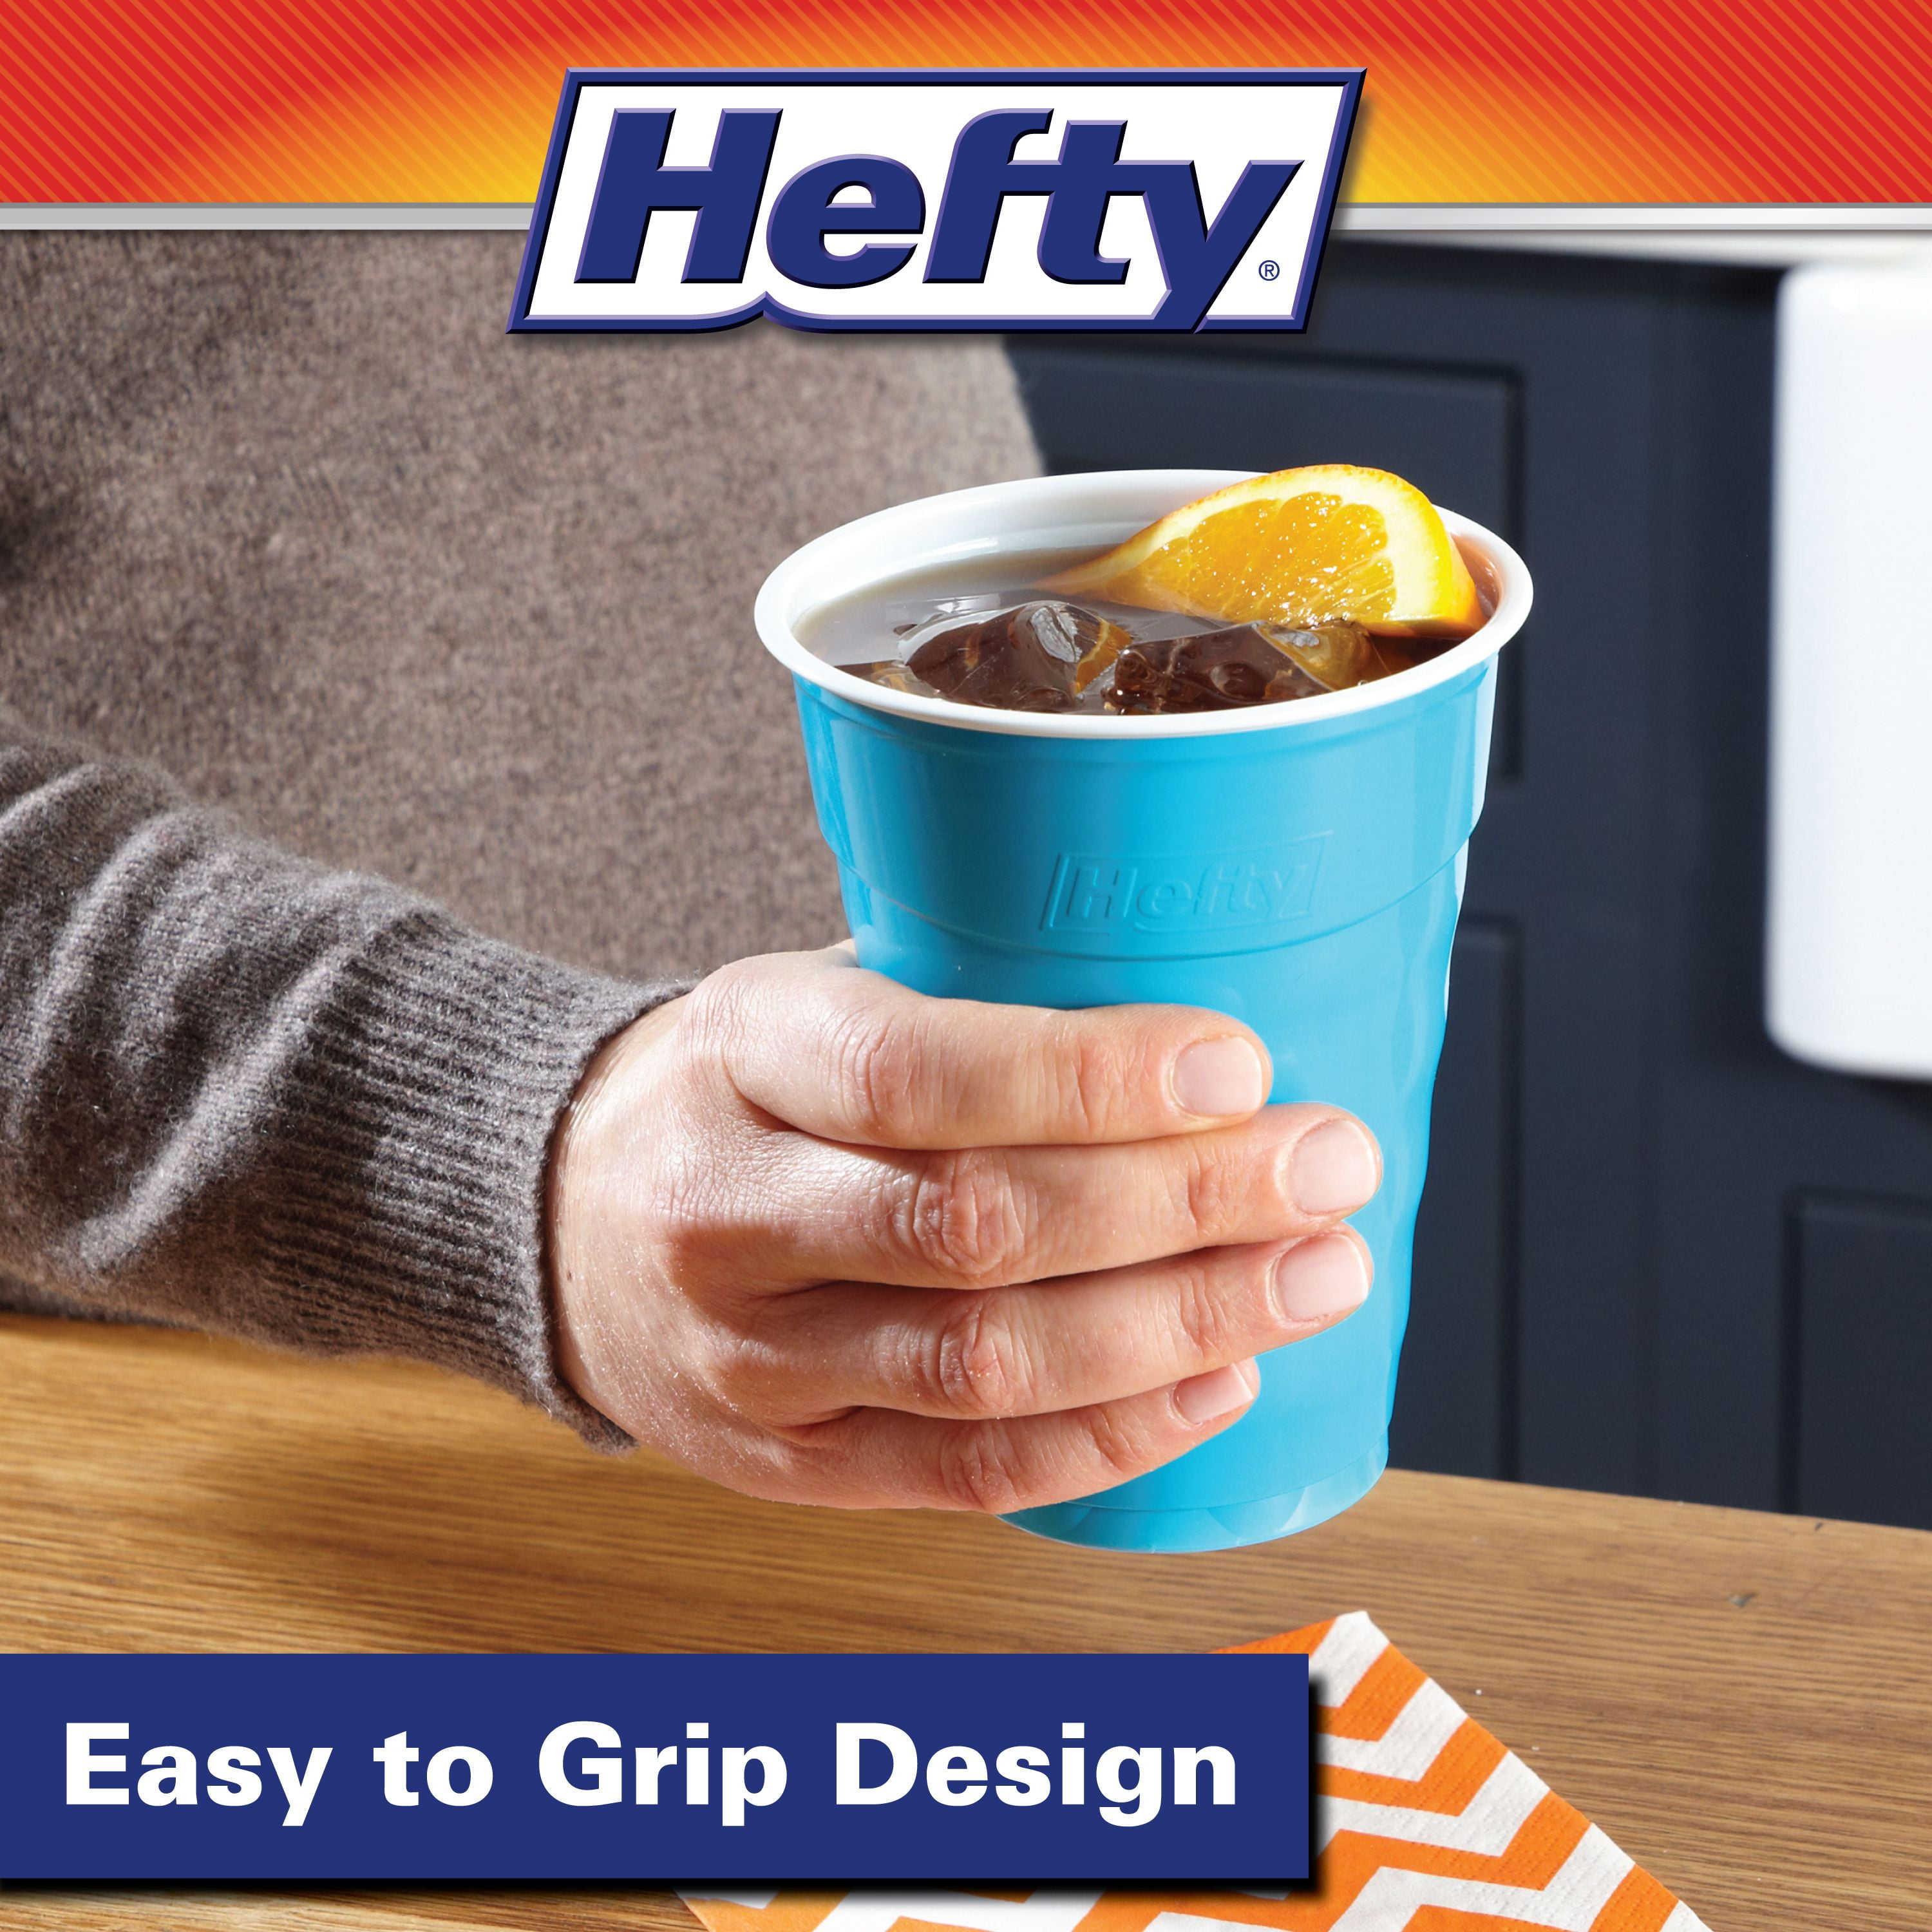 Hefty® Party Cups 